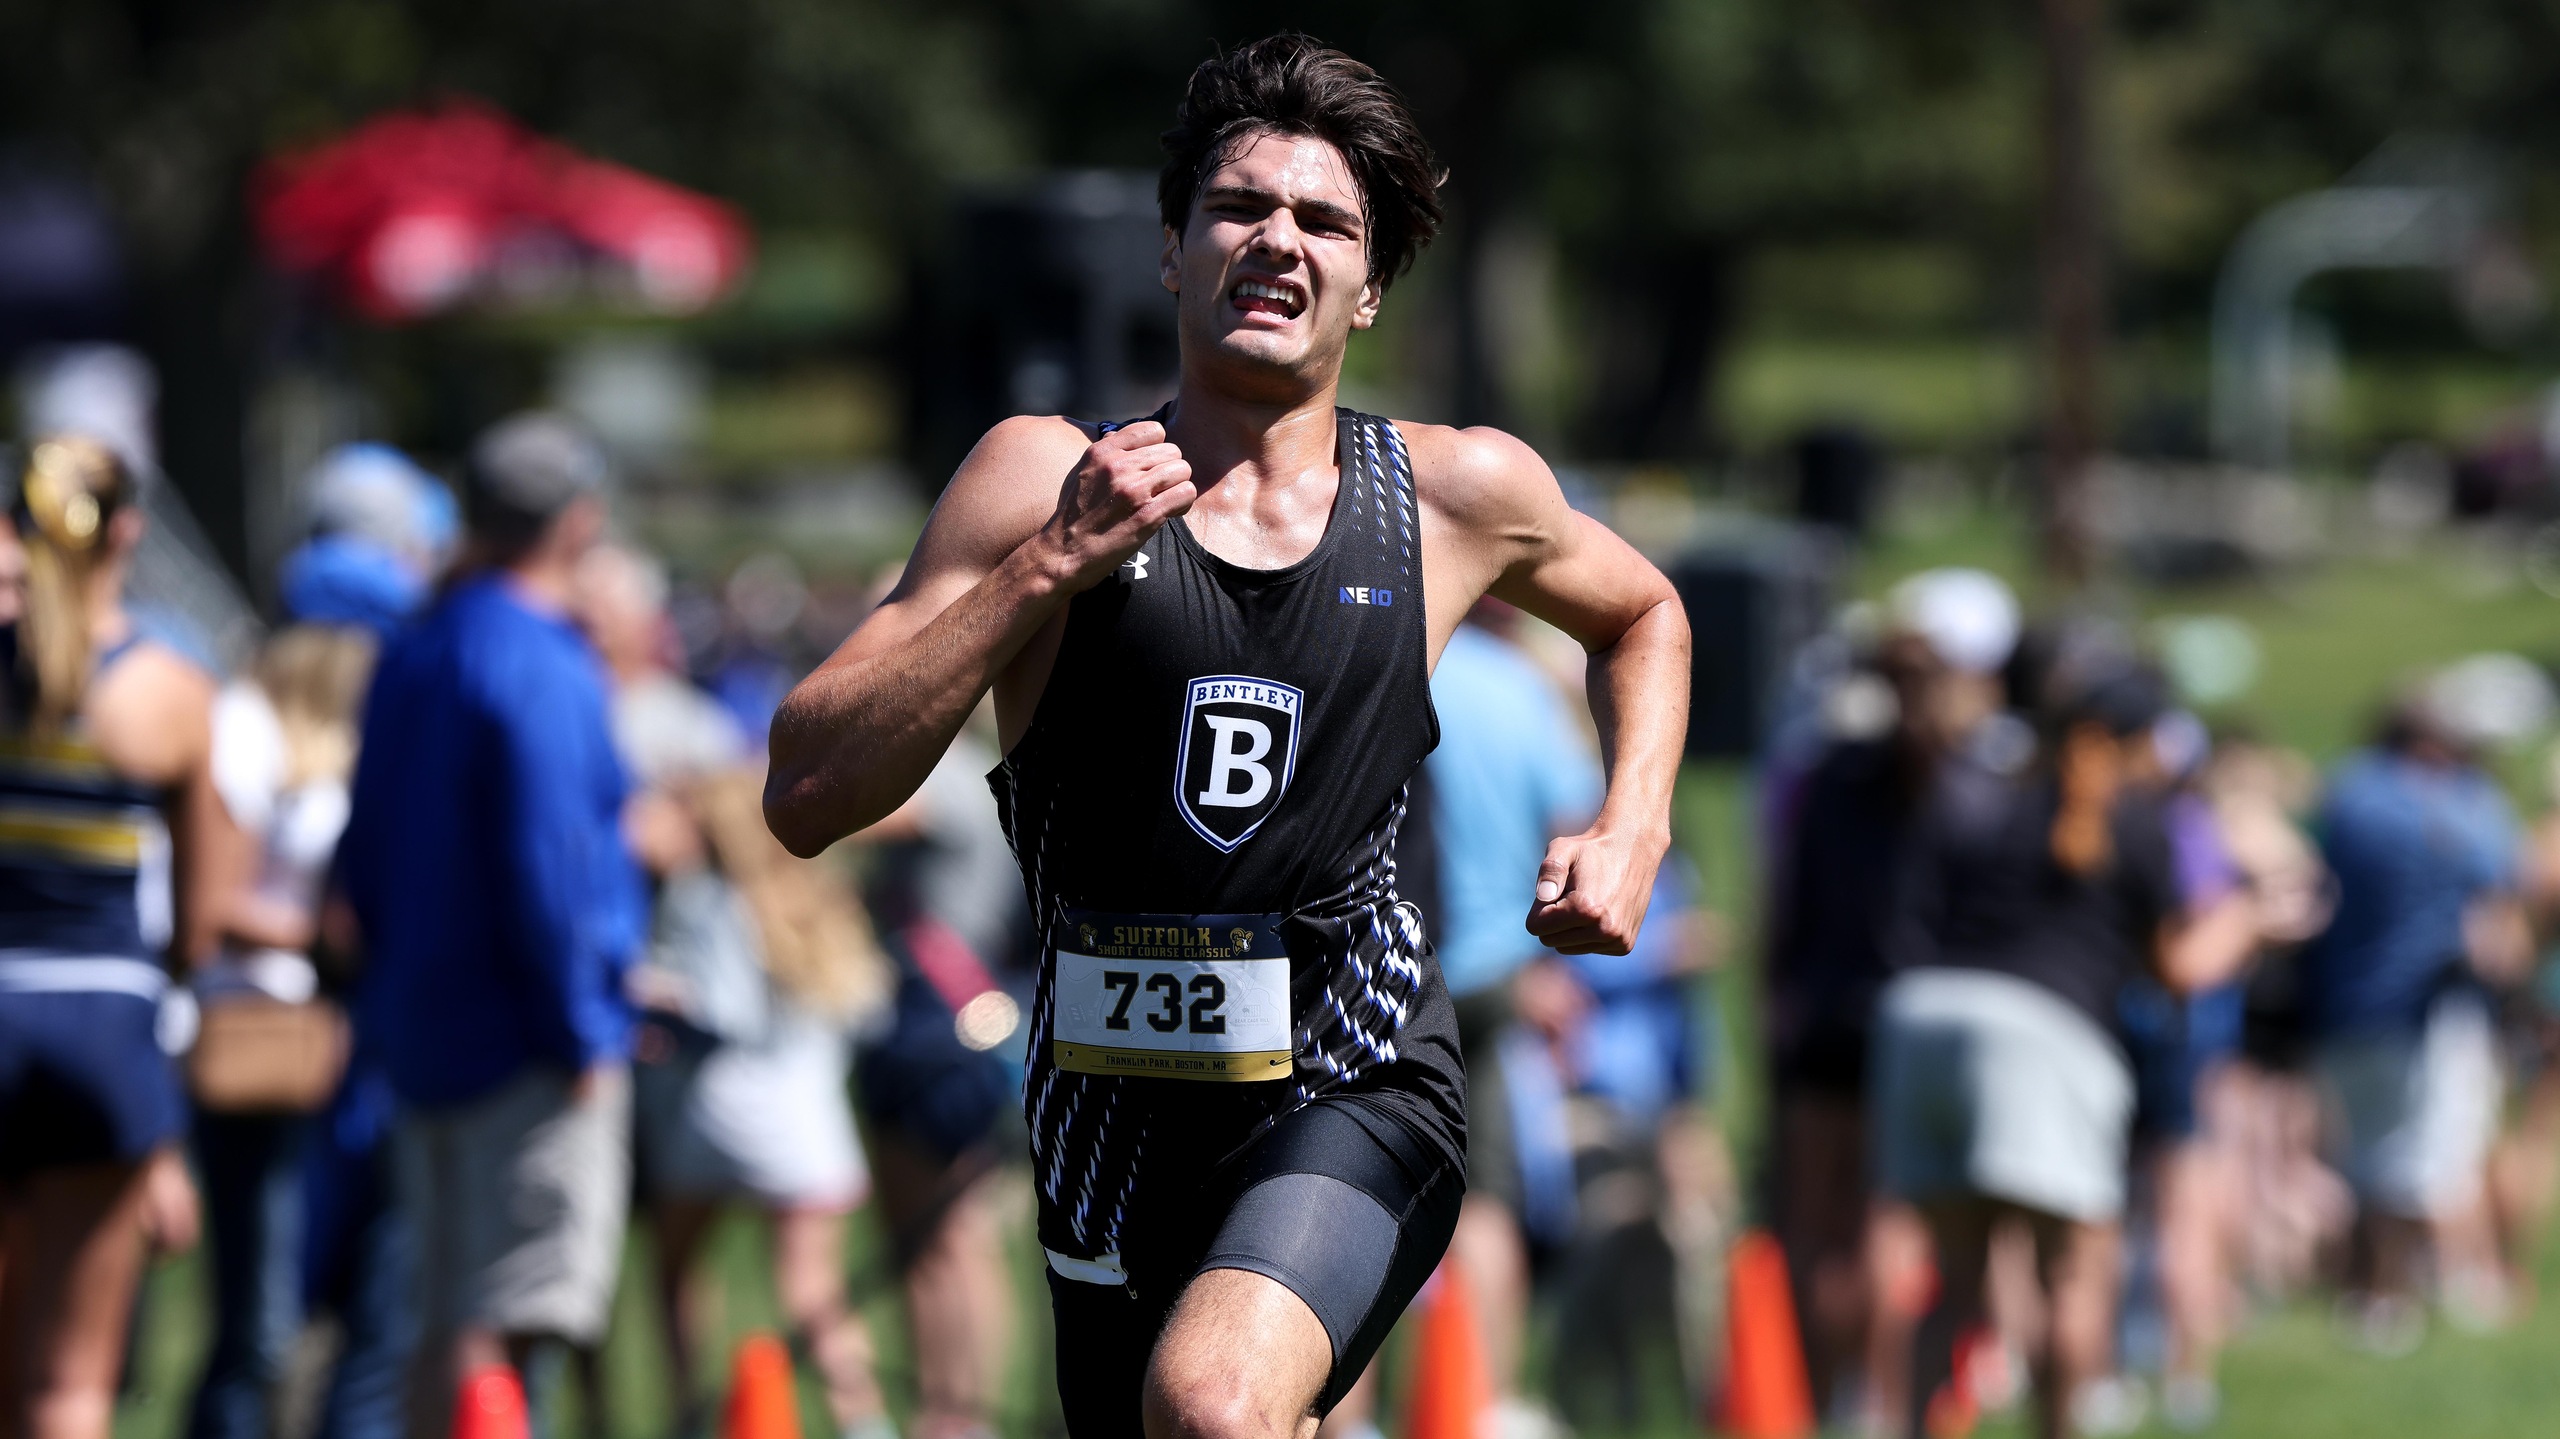 Bentley Finishes 12th of 39 at UMass Dartmouth Invitational